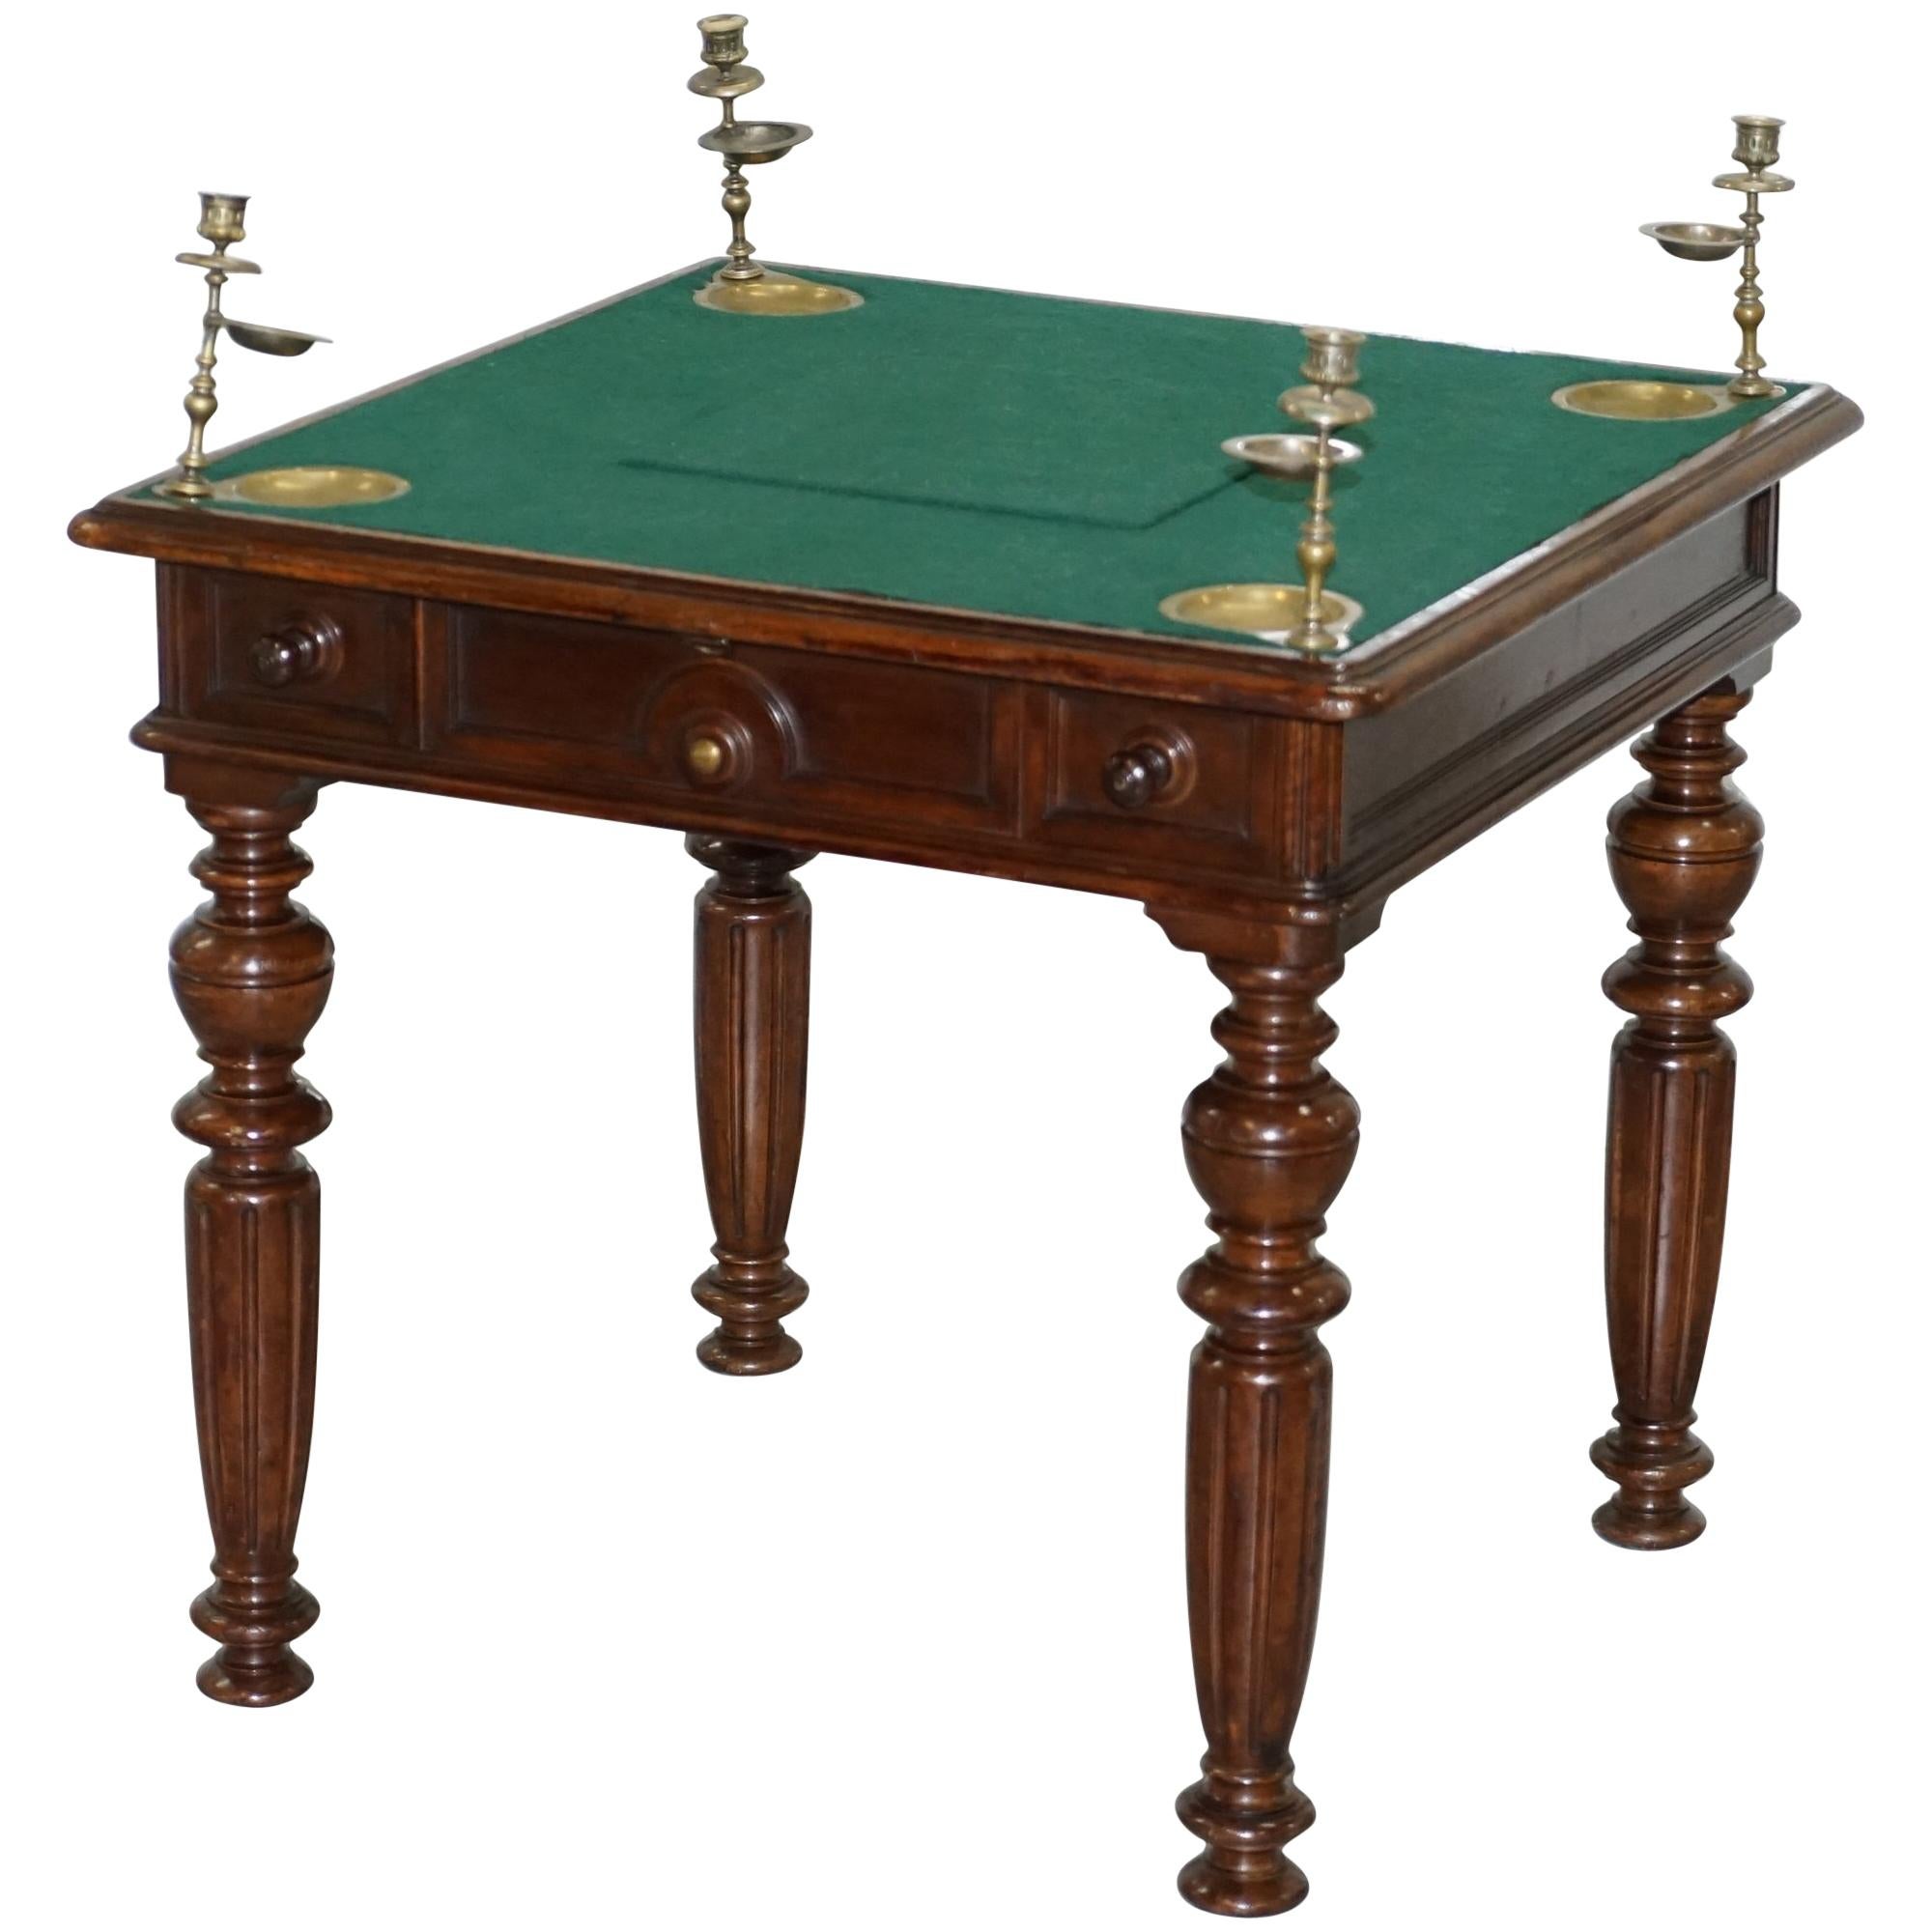 Rare Victorian Games Table circa 1840 Drop Middle Secret Drawers and Buttons For Sale